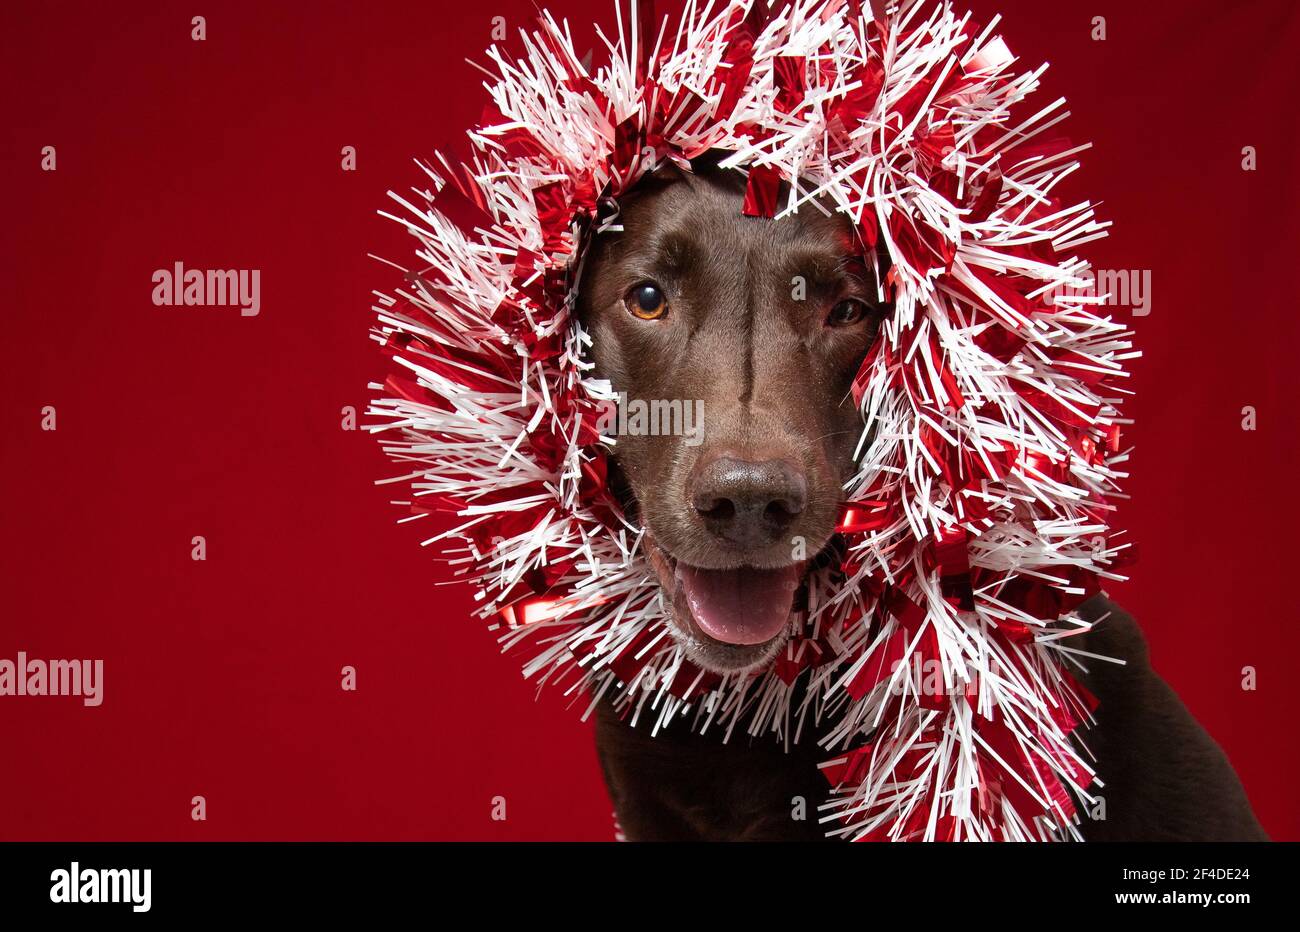 Chocolate labrador dog wrapped in tinsel Stock Photo